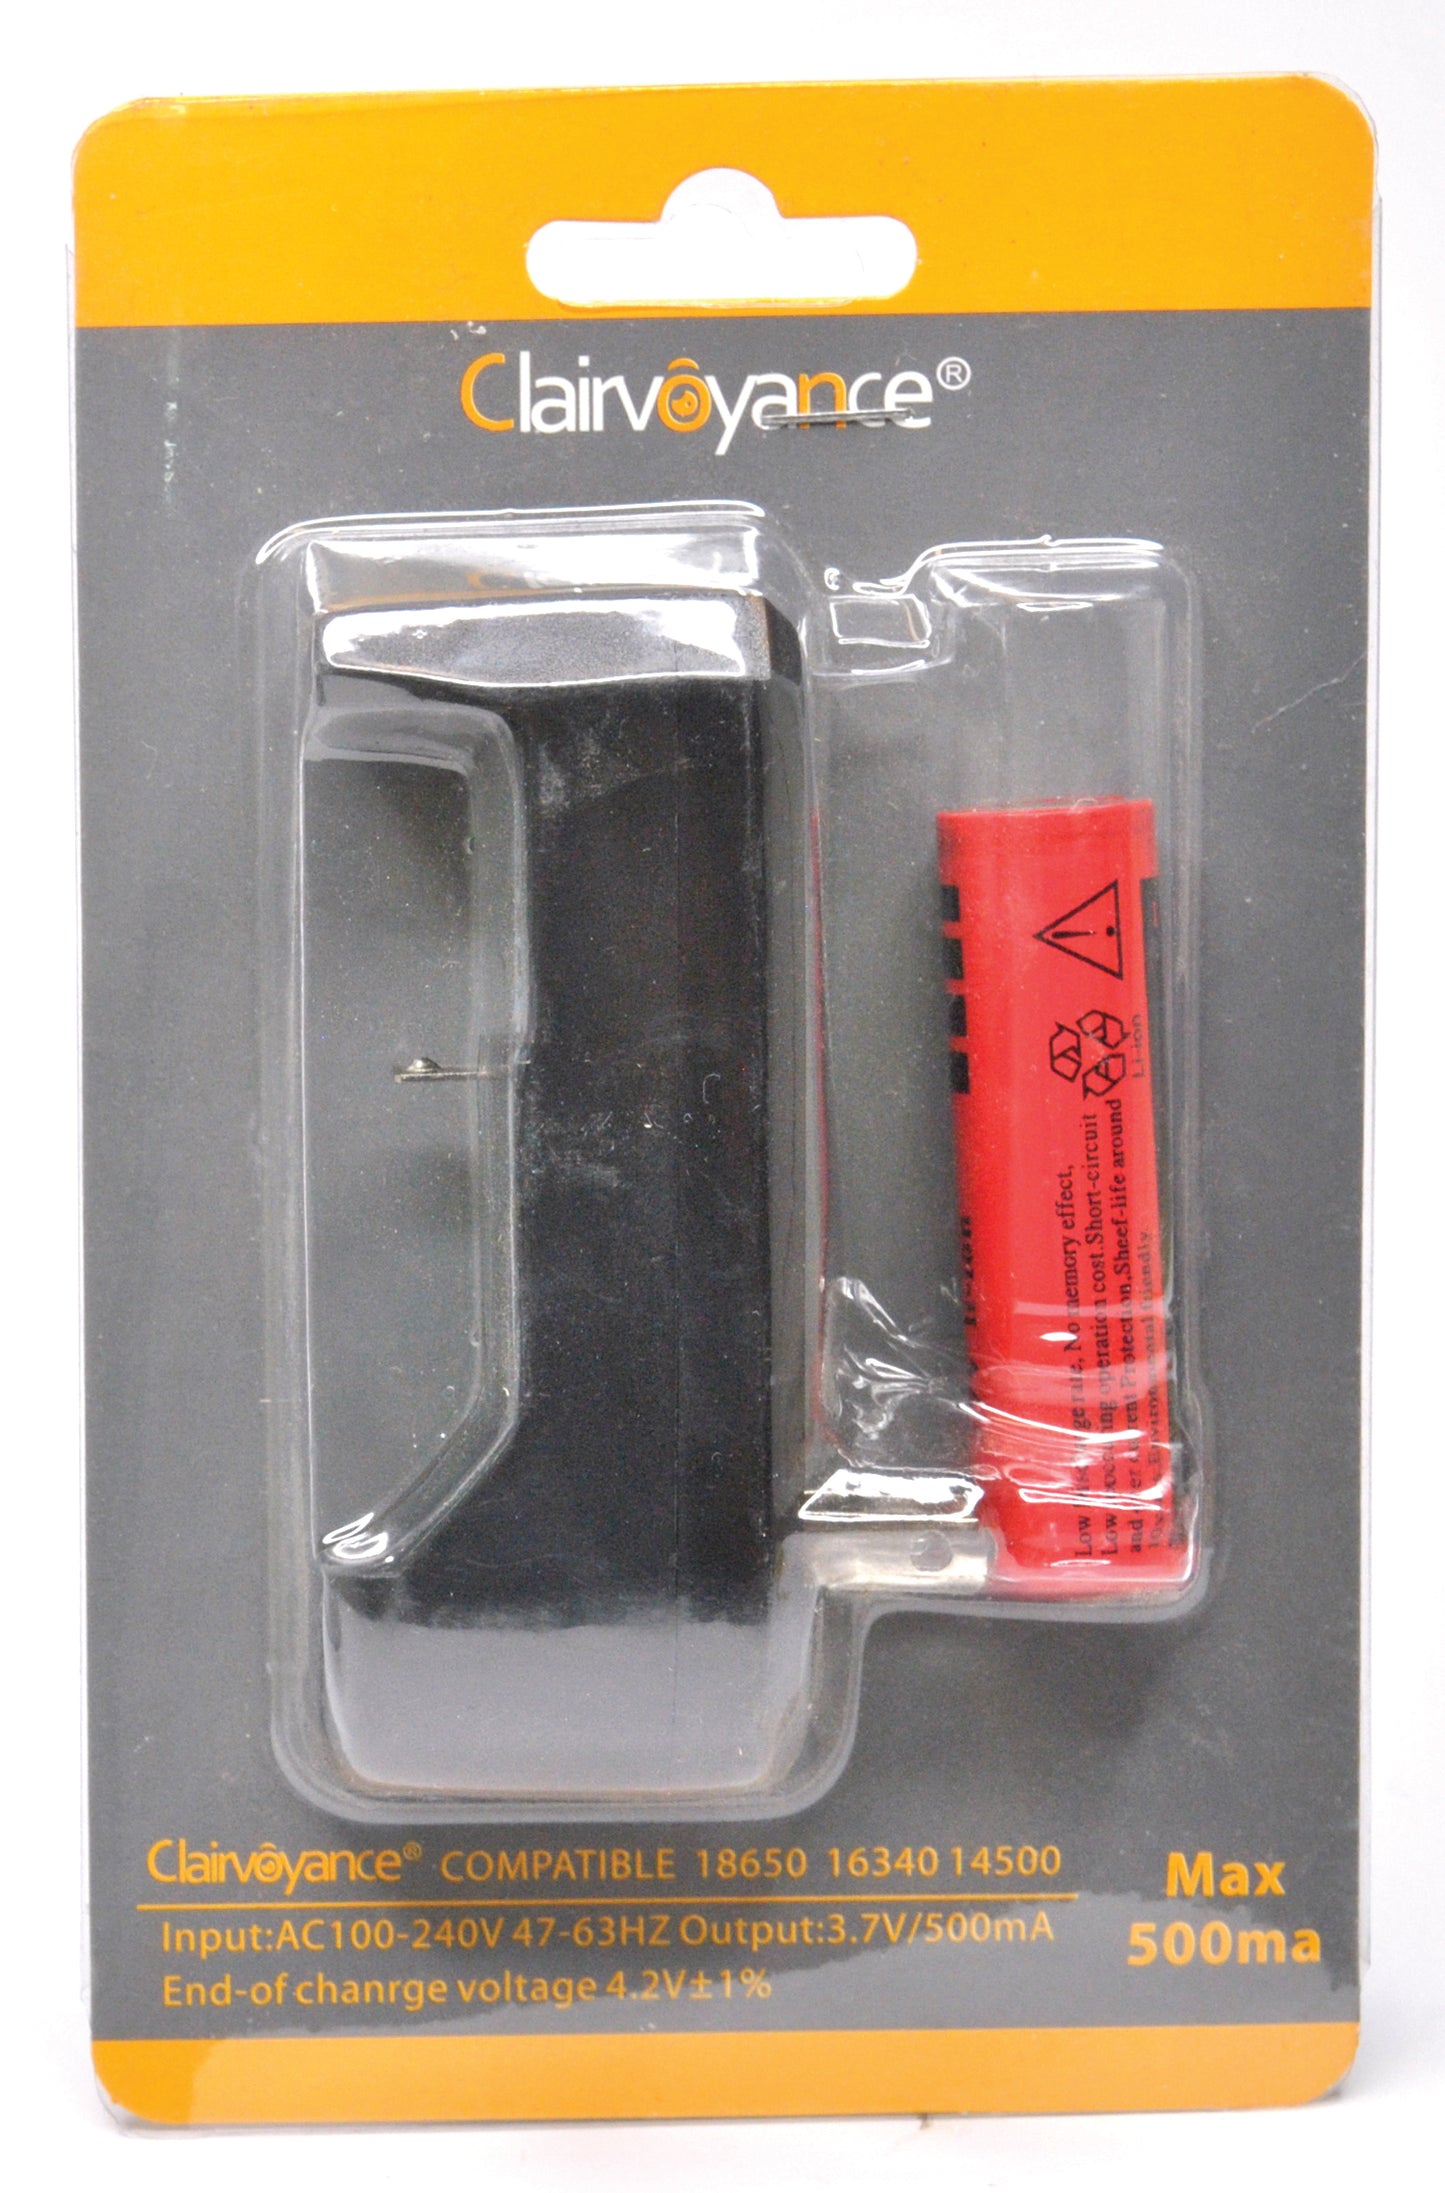 Clairvoyance ES1 Charger & Rechargeable Battery(500ma) (ZF238)